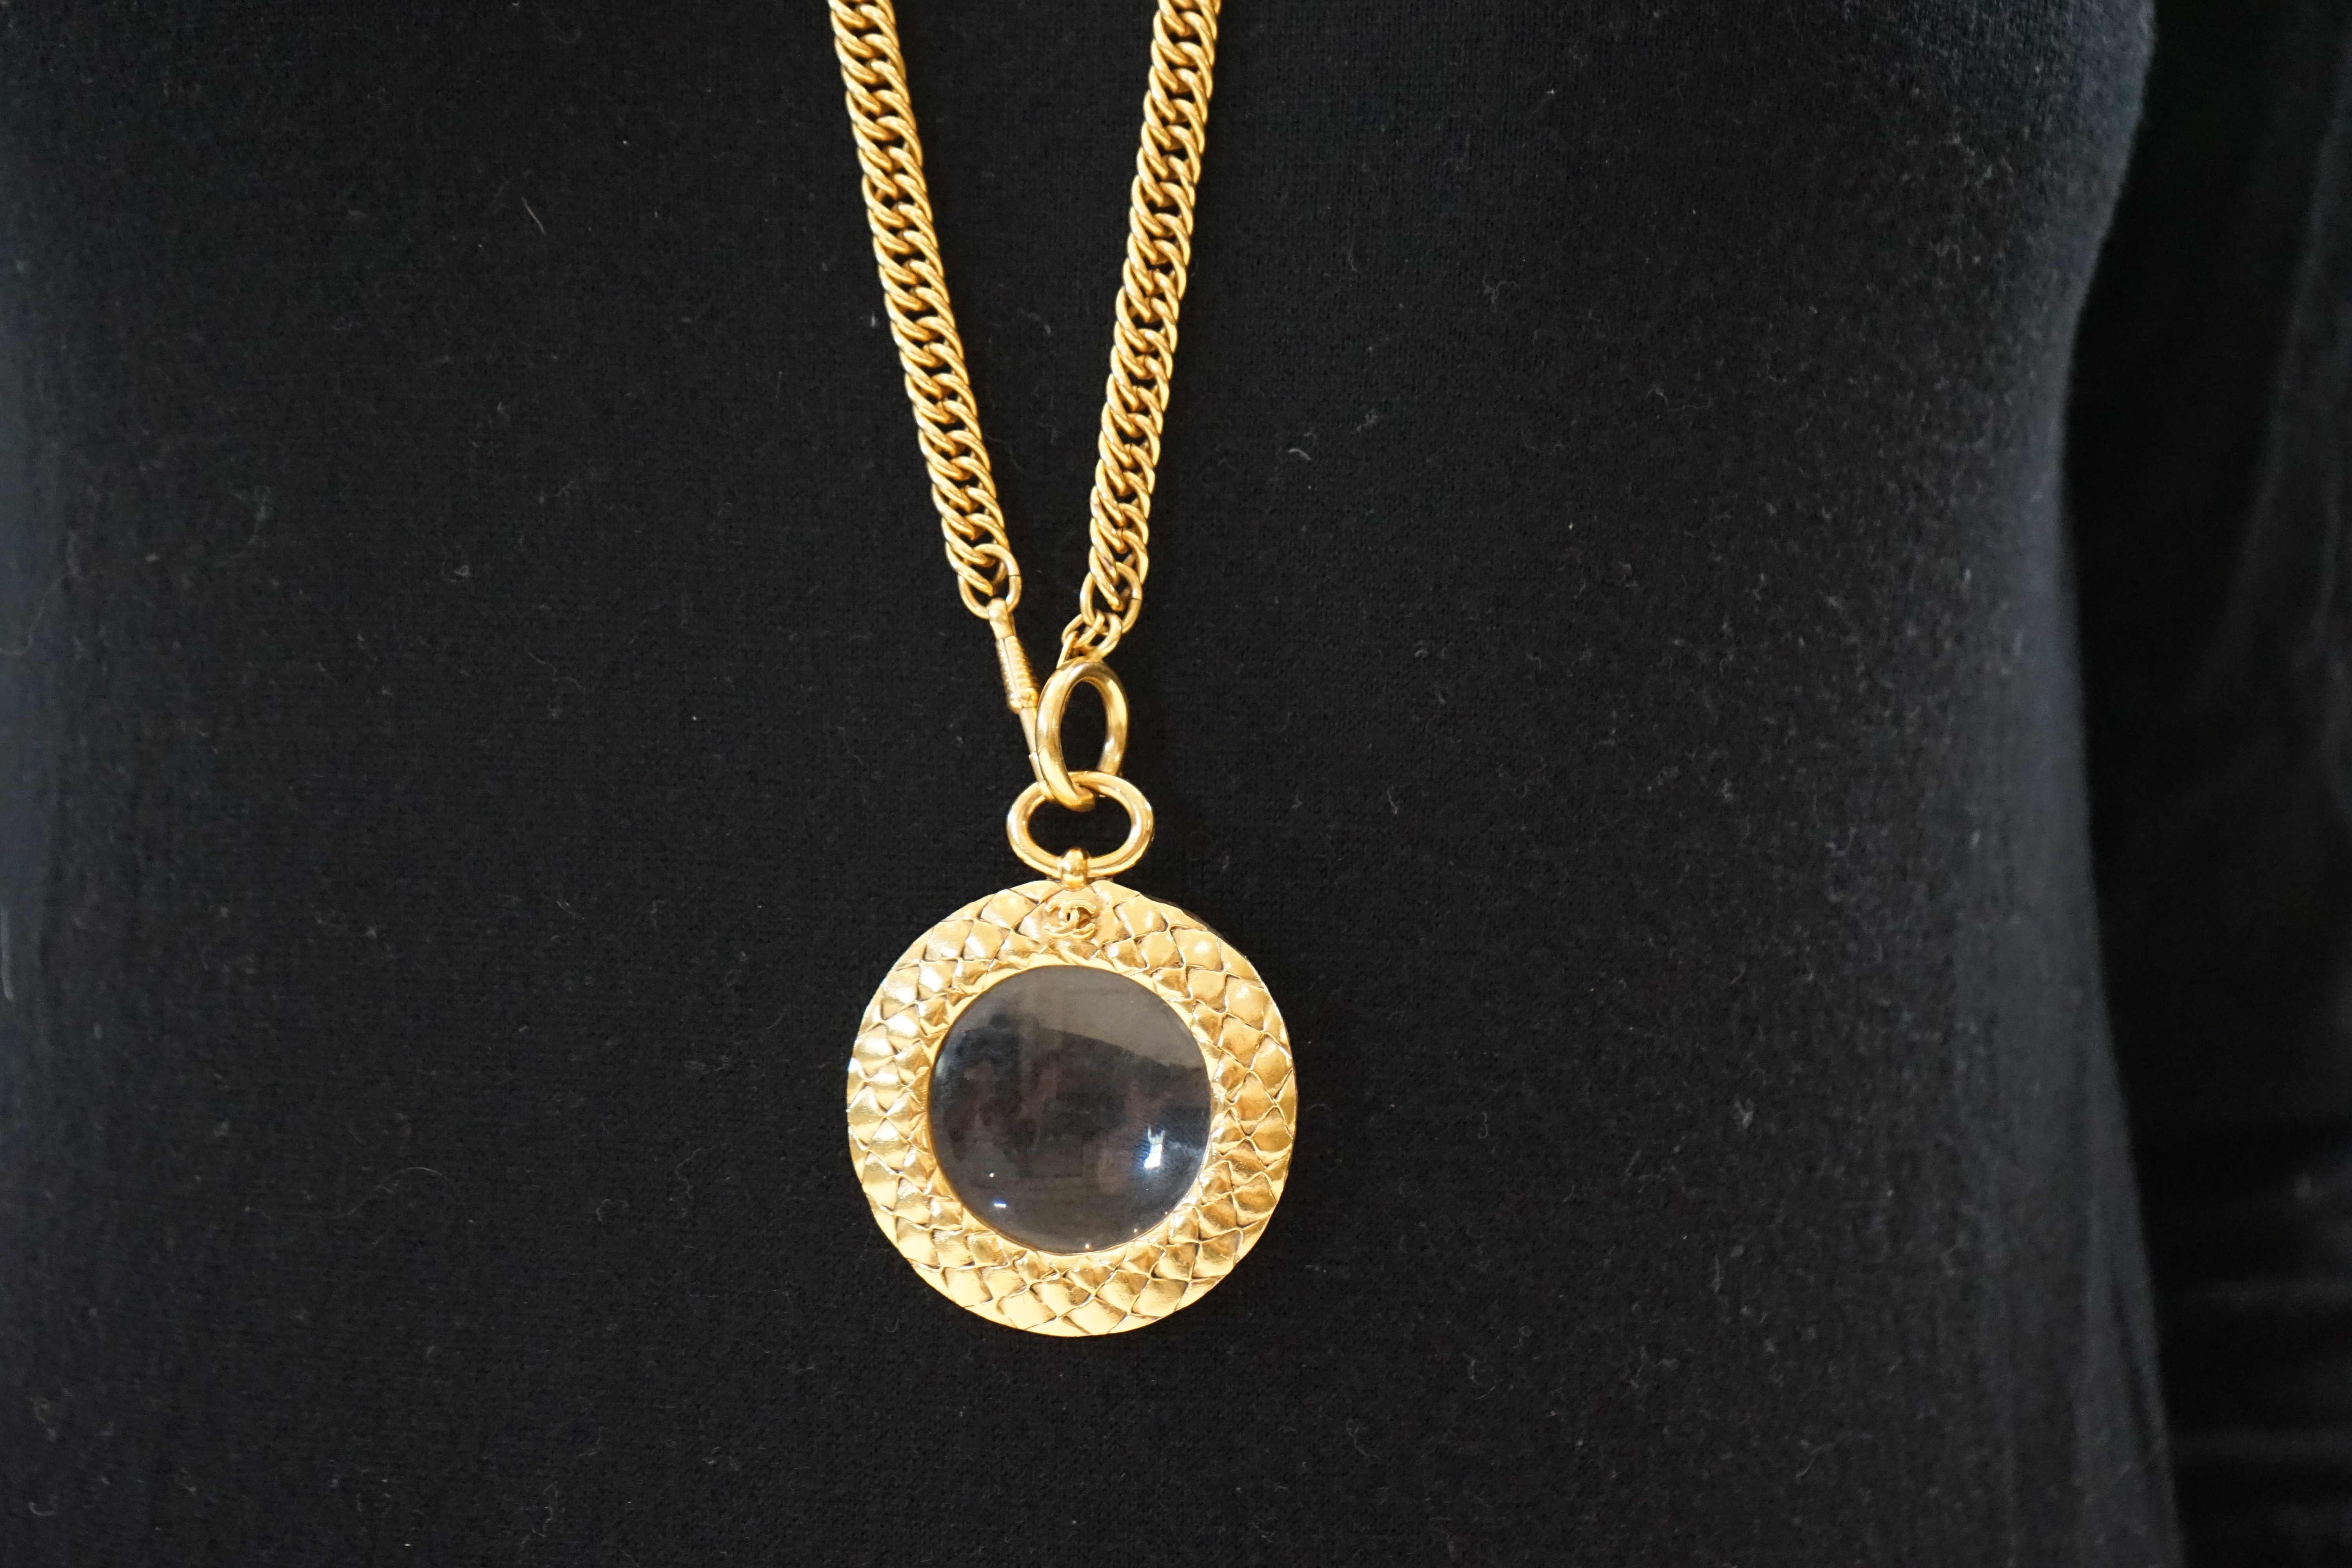 A 1980s Chanel gilt metal 'Scales Textured' magnifying loupe necklace chain length 900mm, pendant width 66mm, height 52mm